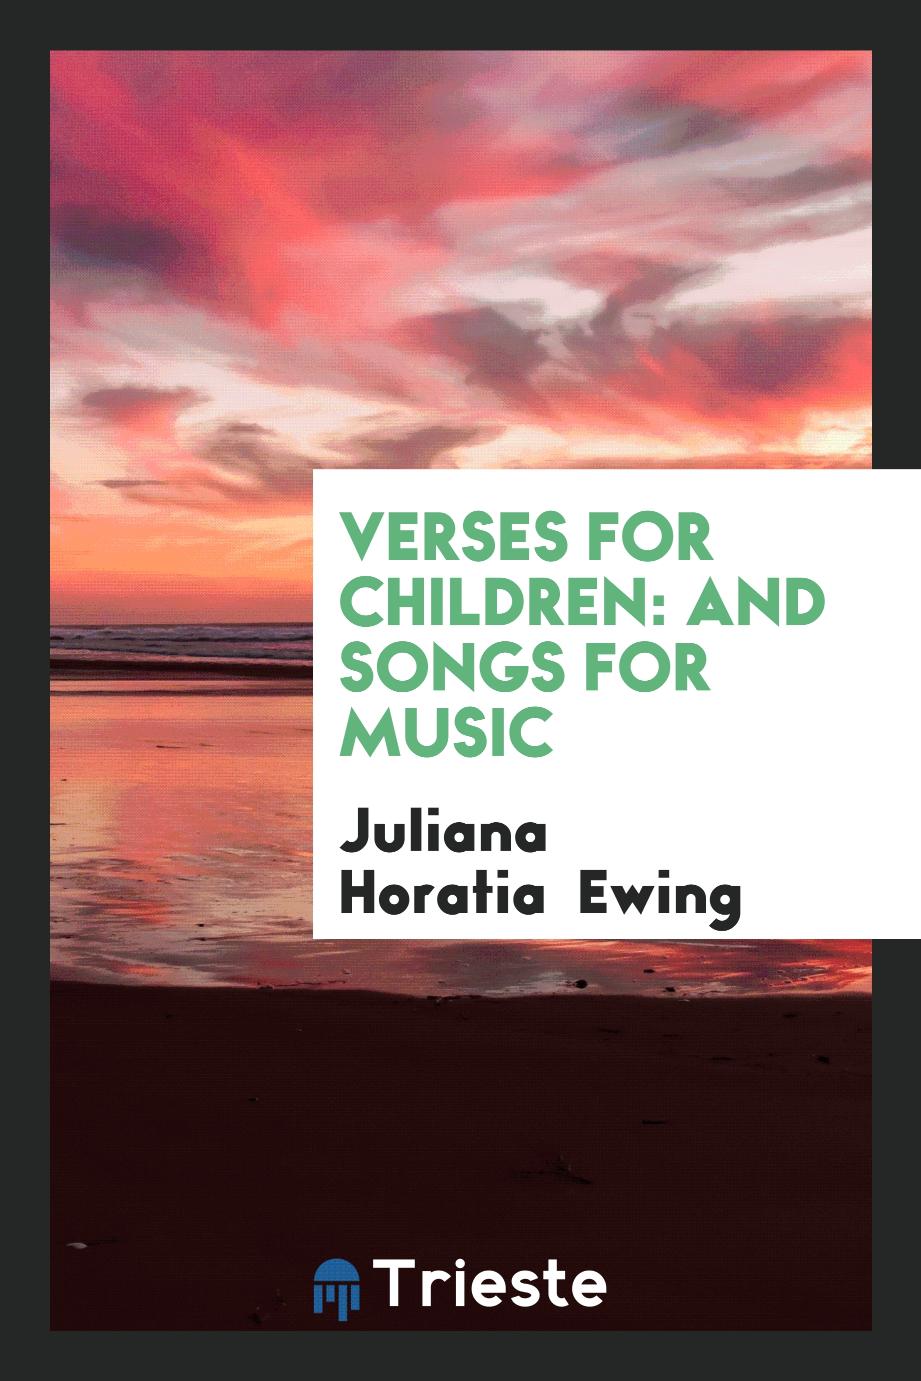 Verses for children: and songs for music